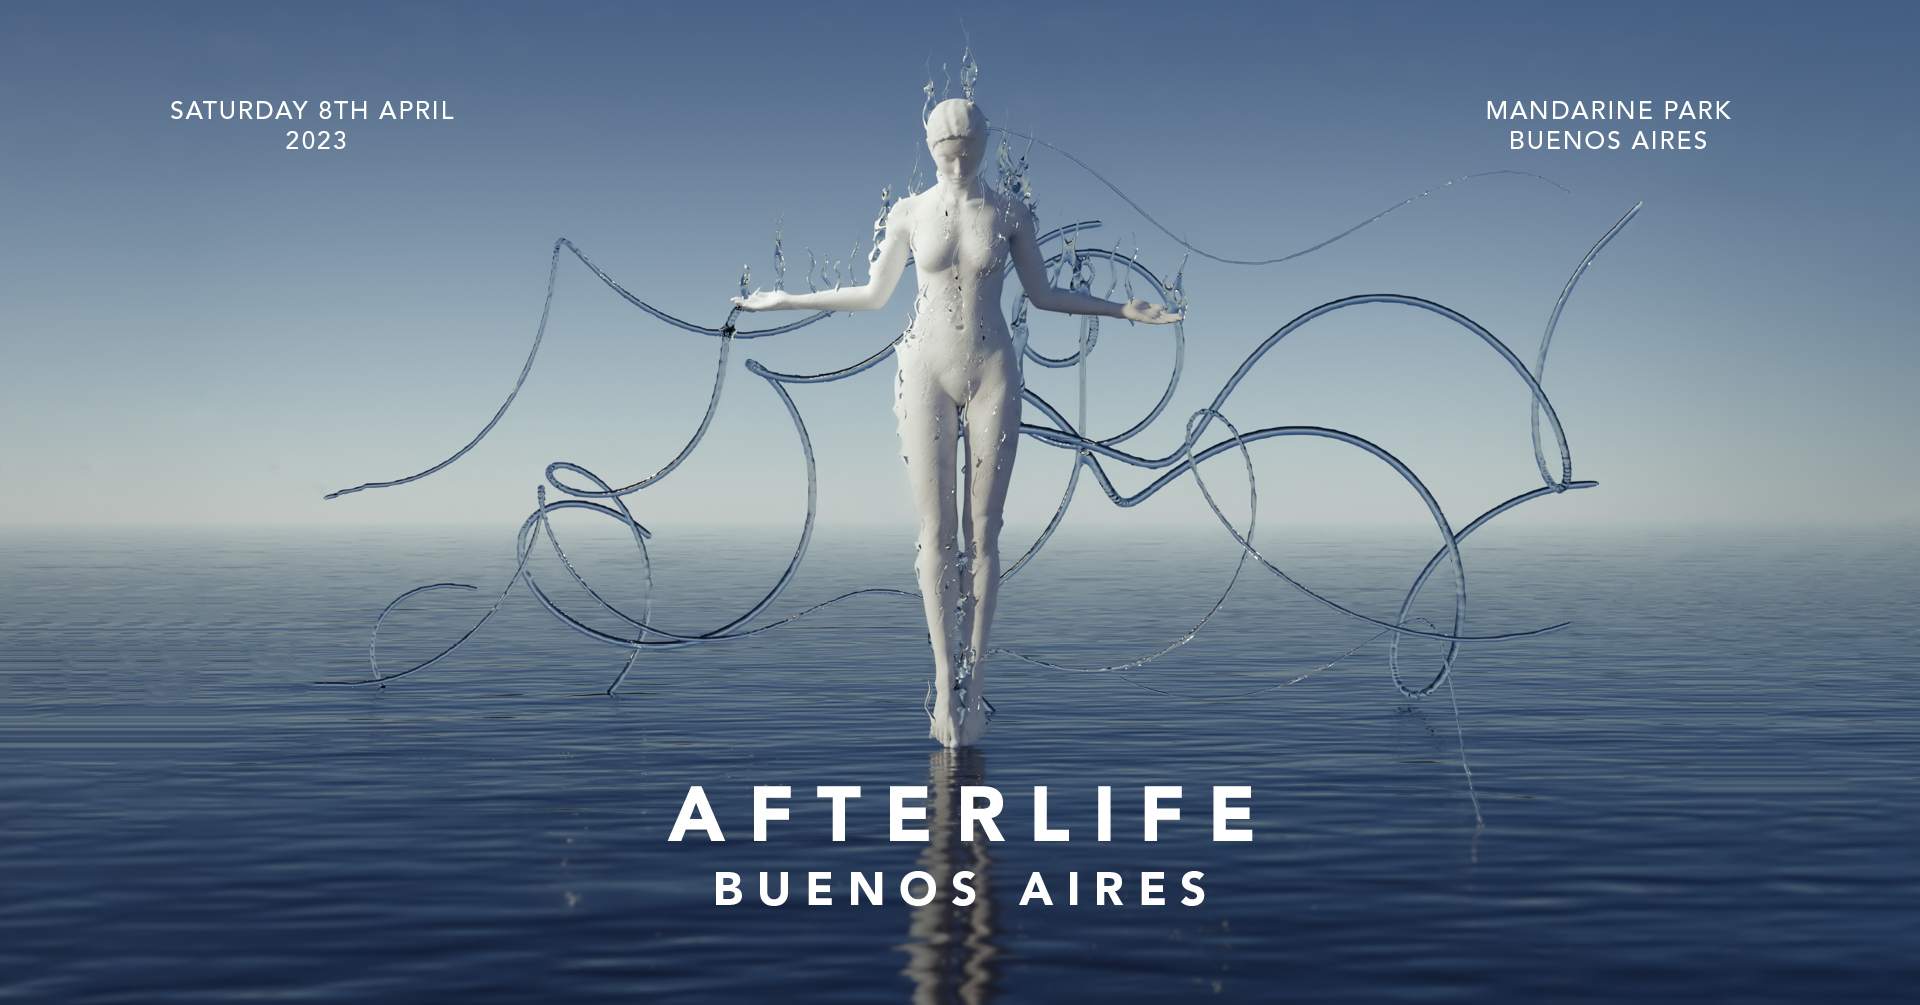 Afterlife Buenos Aires (@afterlifebuenosaires) • Instagram photos